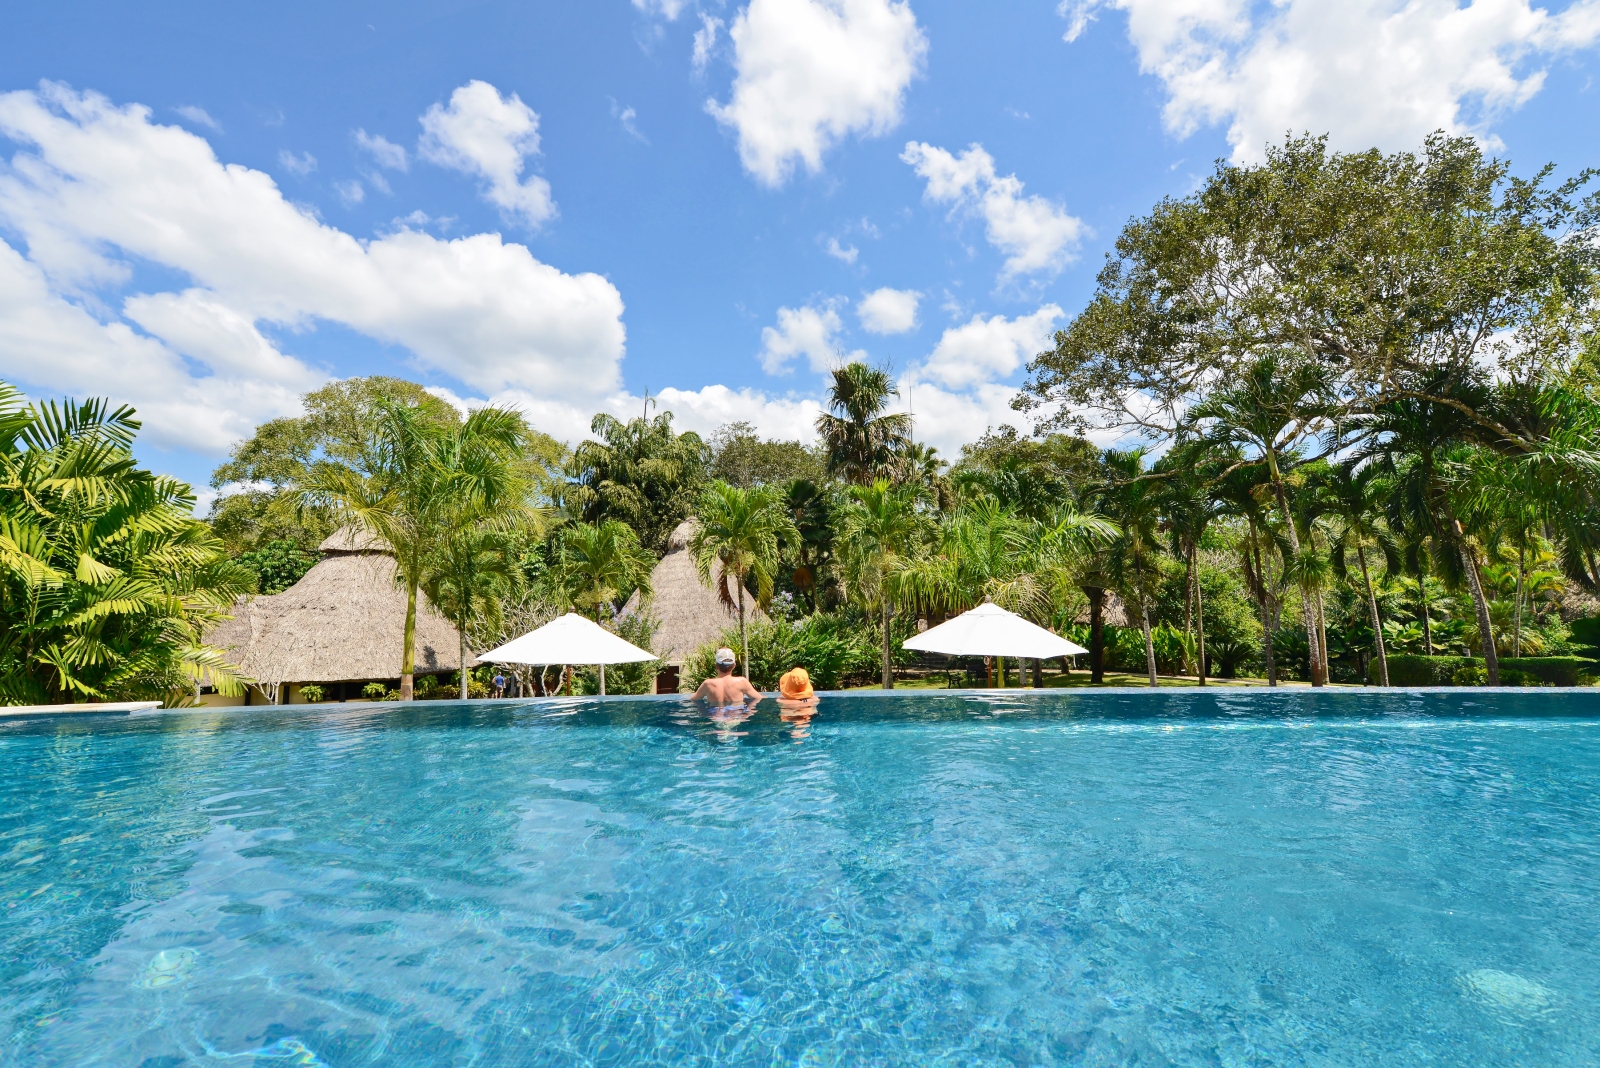 Pool at The Lodge at Chaa Creek in Belize